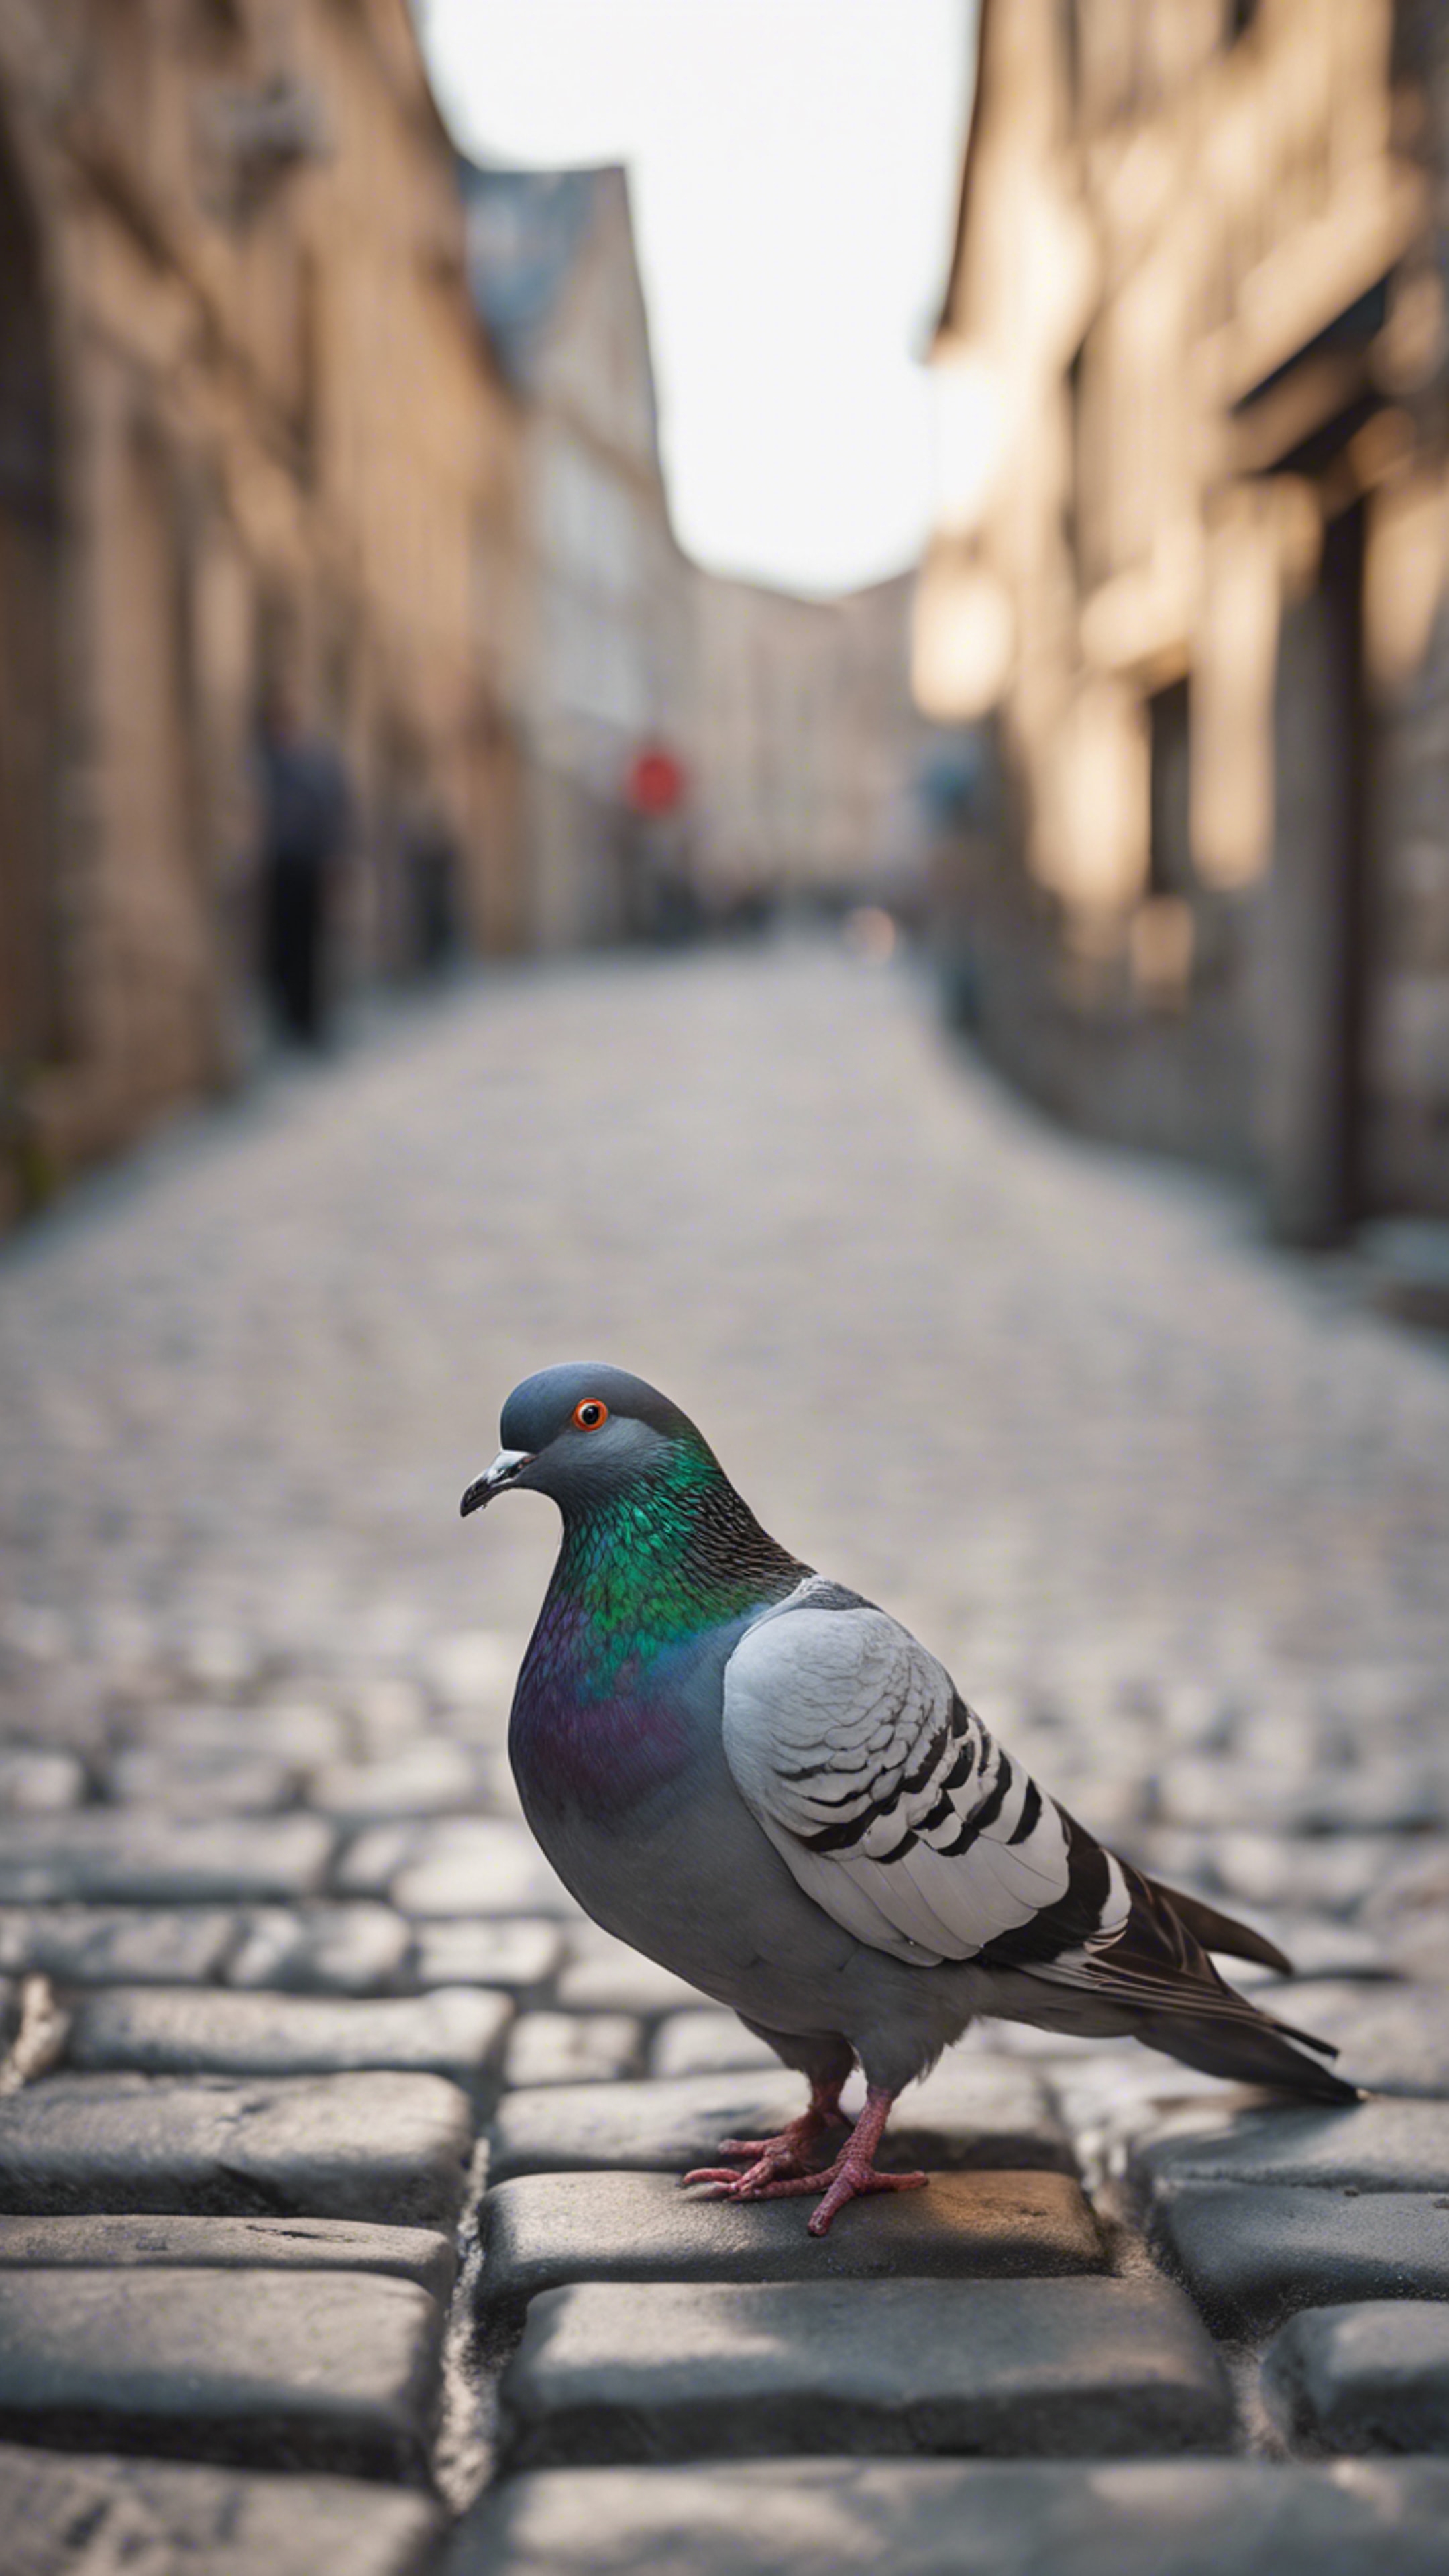 A pigeon standing on cobblestone street in the middle of an old city, its beautiful light gray plumage glistening. Tapet[03a93bb4226c4140ad33]